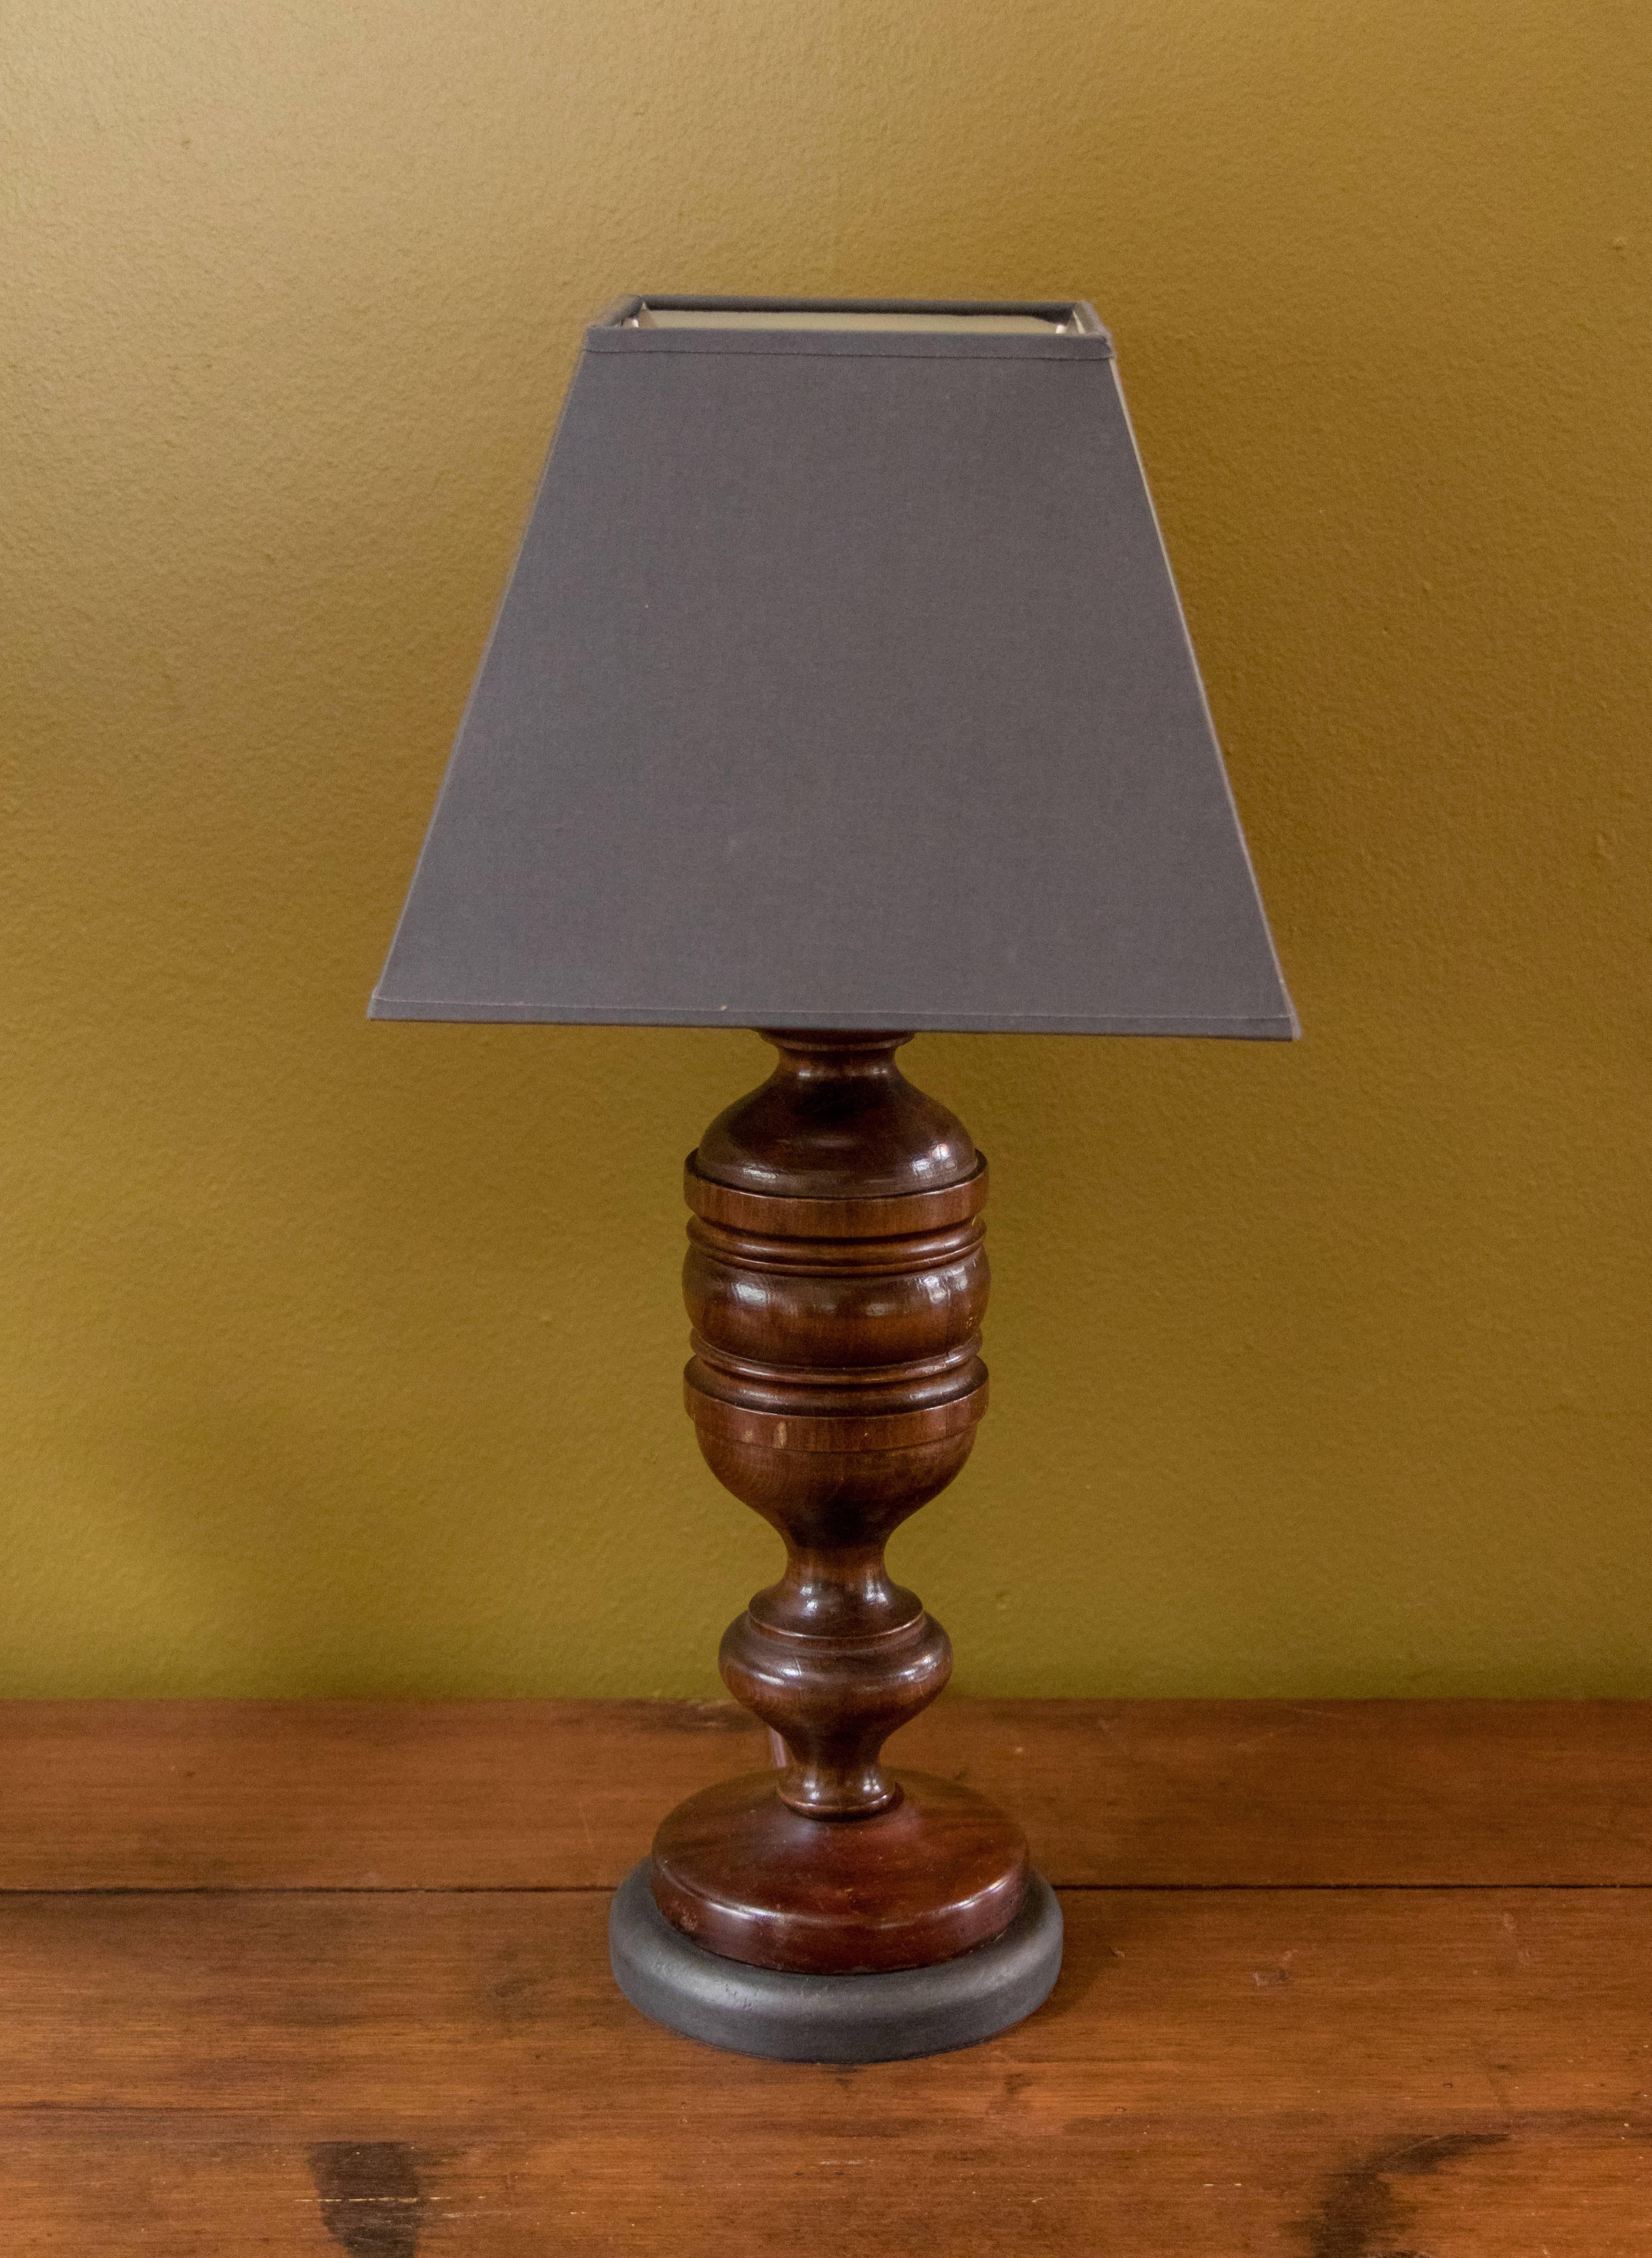 Charming pair of dark mahogany wood hand-turned table lamps with painted dark grey wooden bases from Belgium, circa 1920s. Comes with two custom-made Belgian linen shades in a dark grey color. Perfect size for bedside lamps. Newly wired with all UL